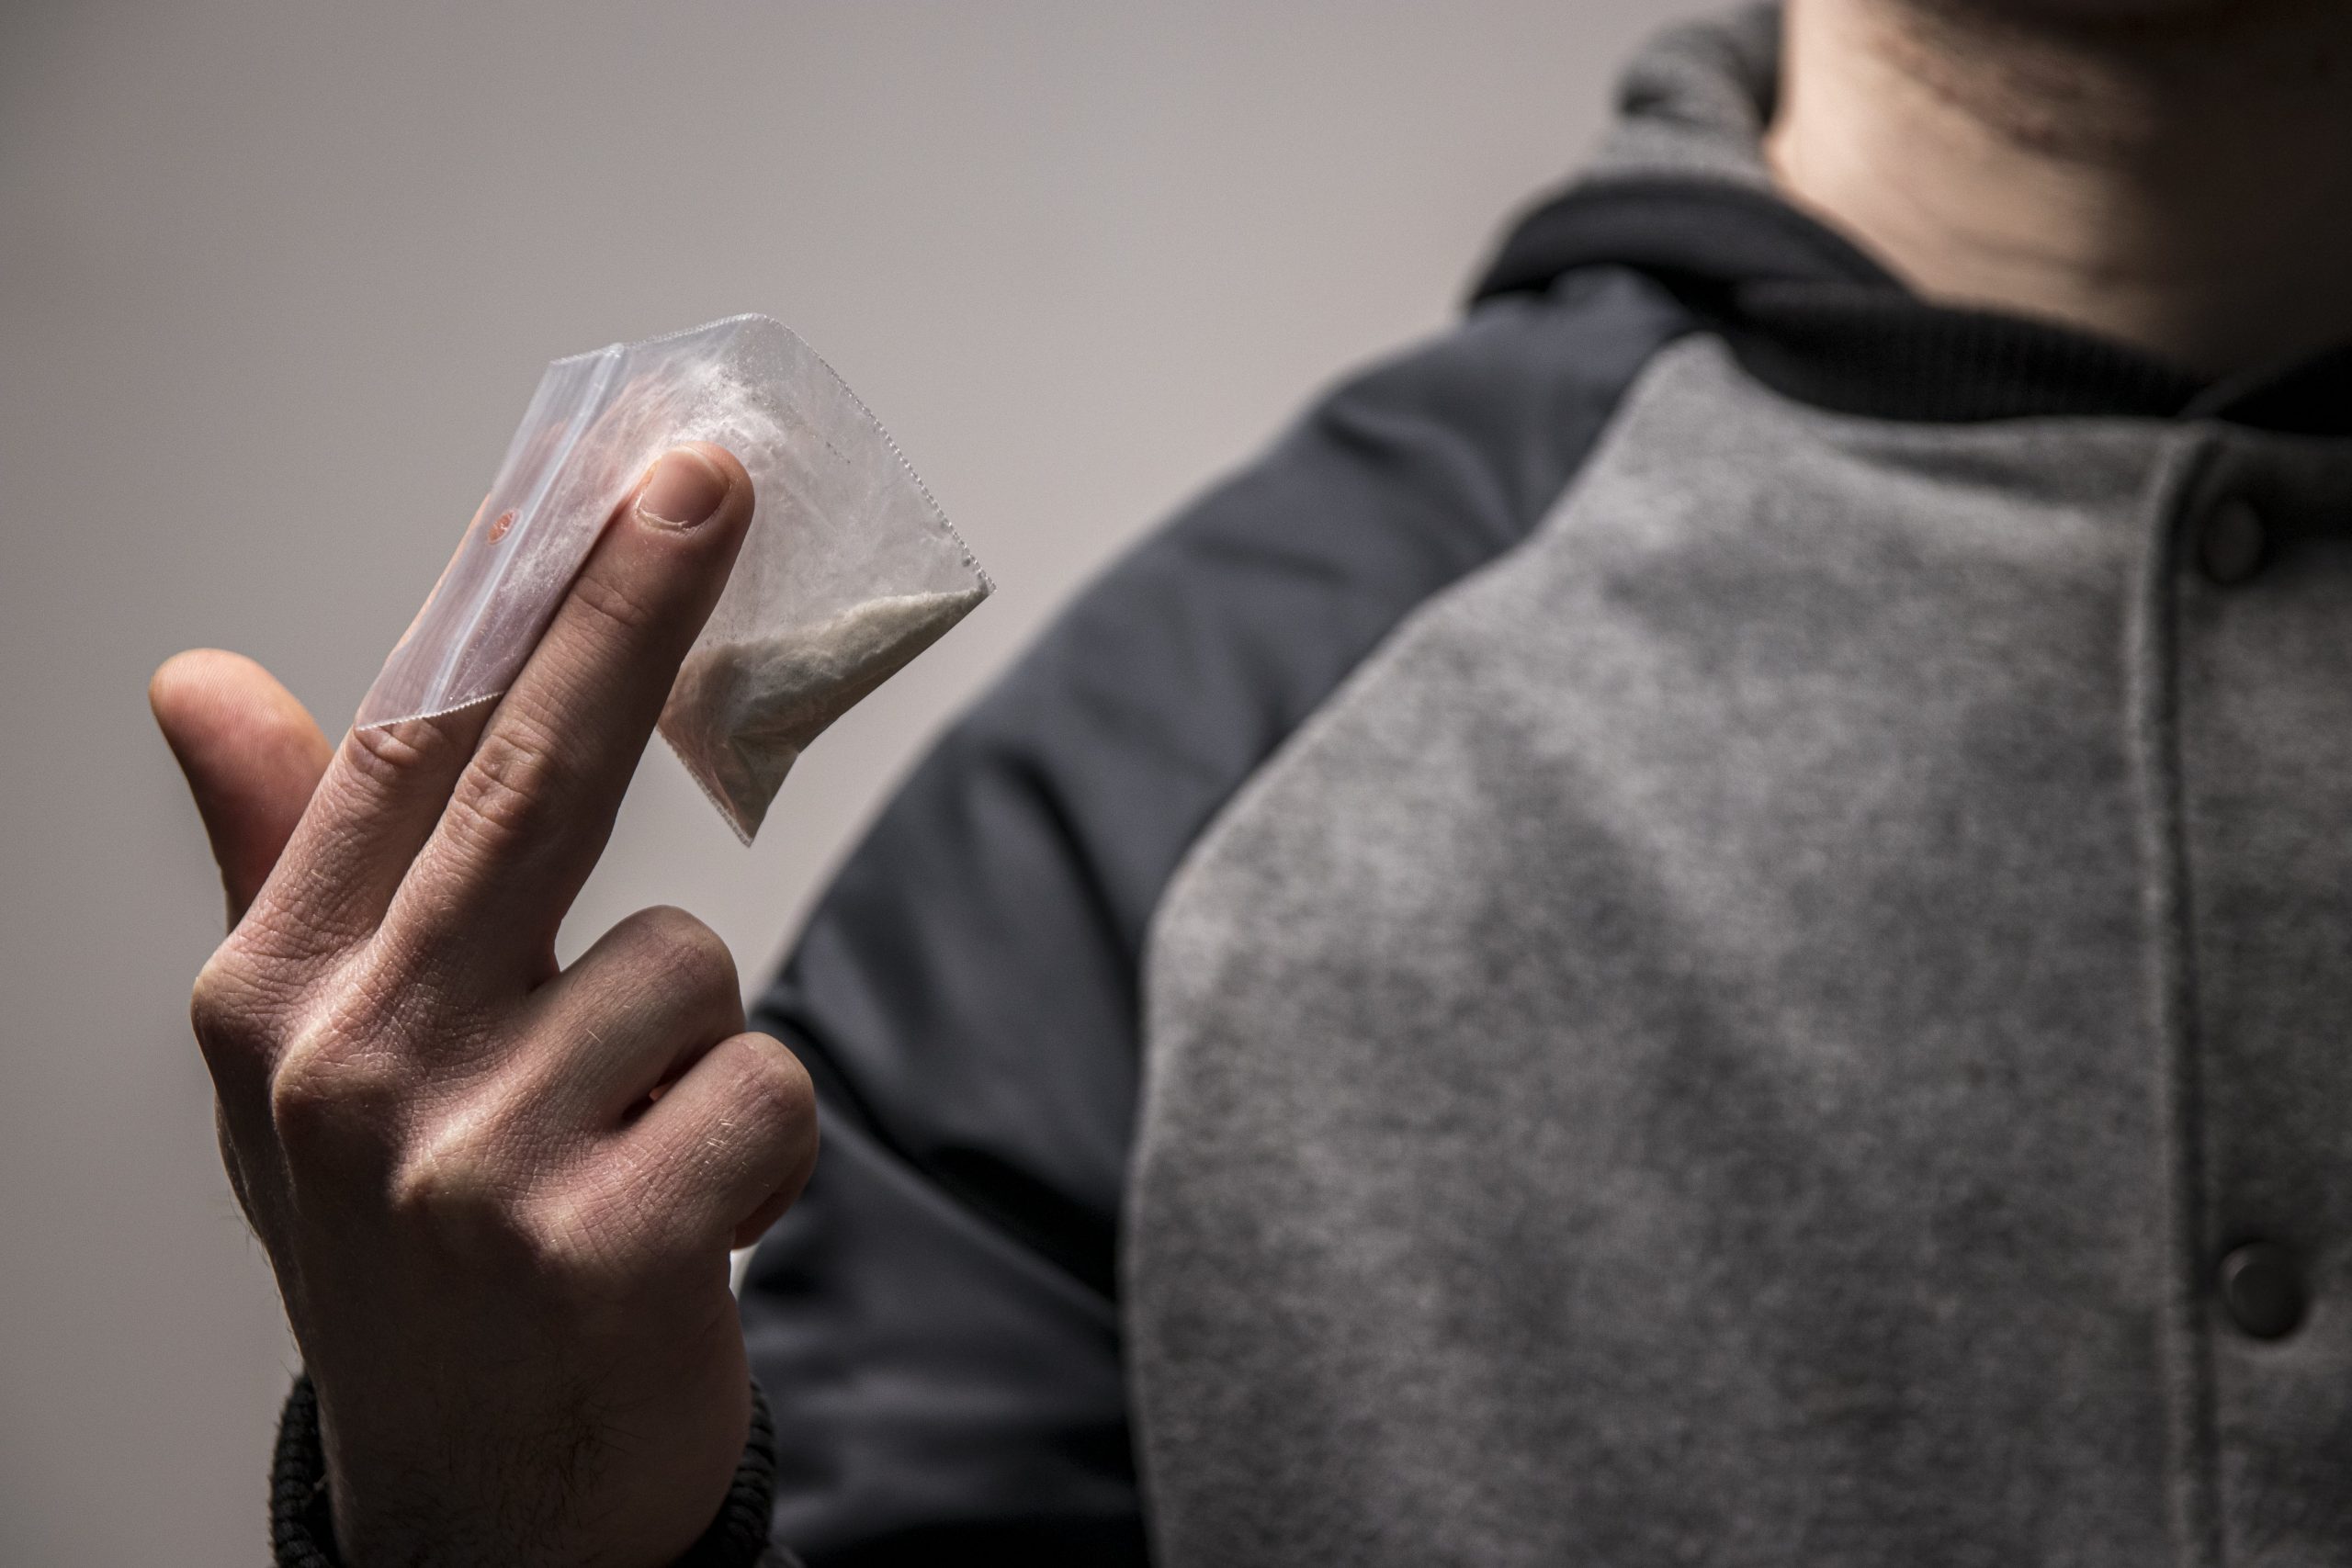 drug supply offences and law in NSW